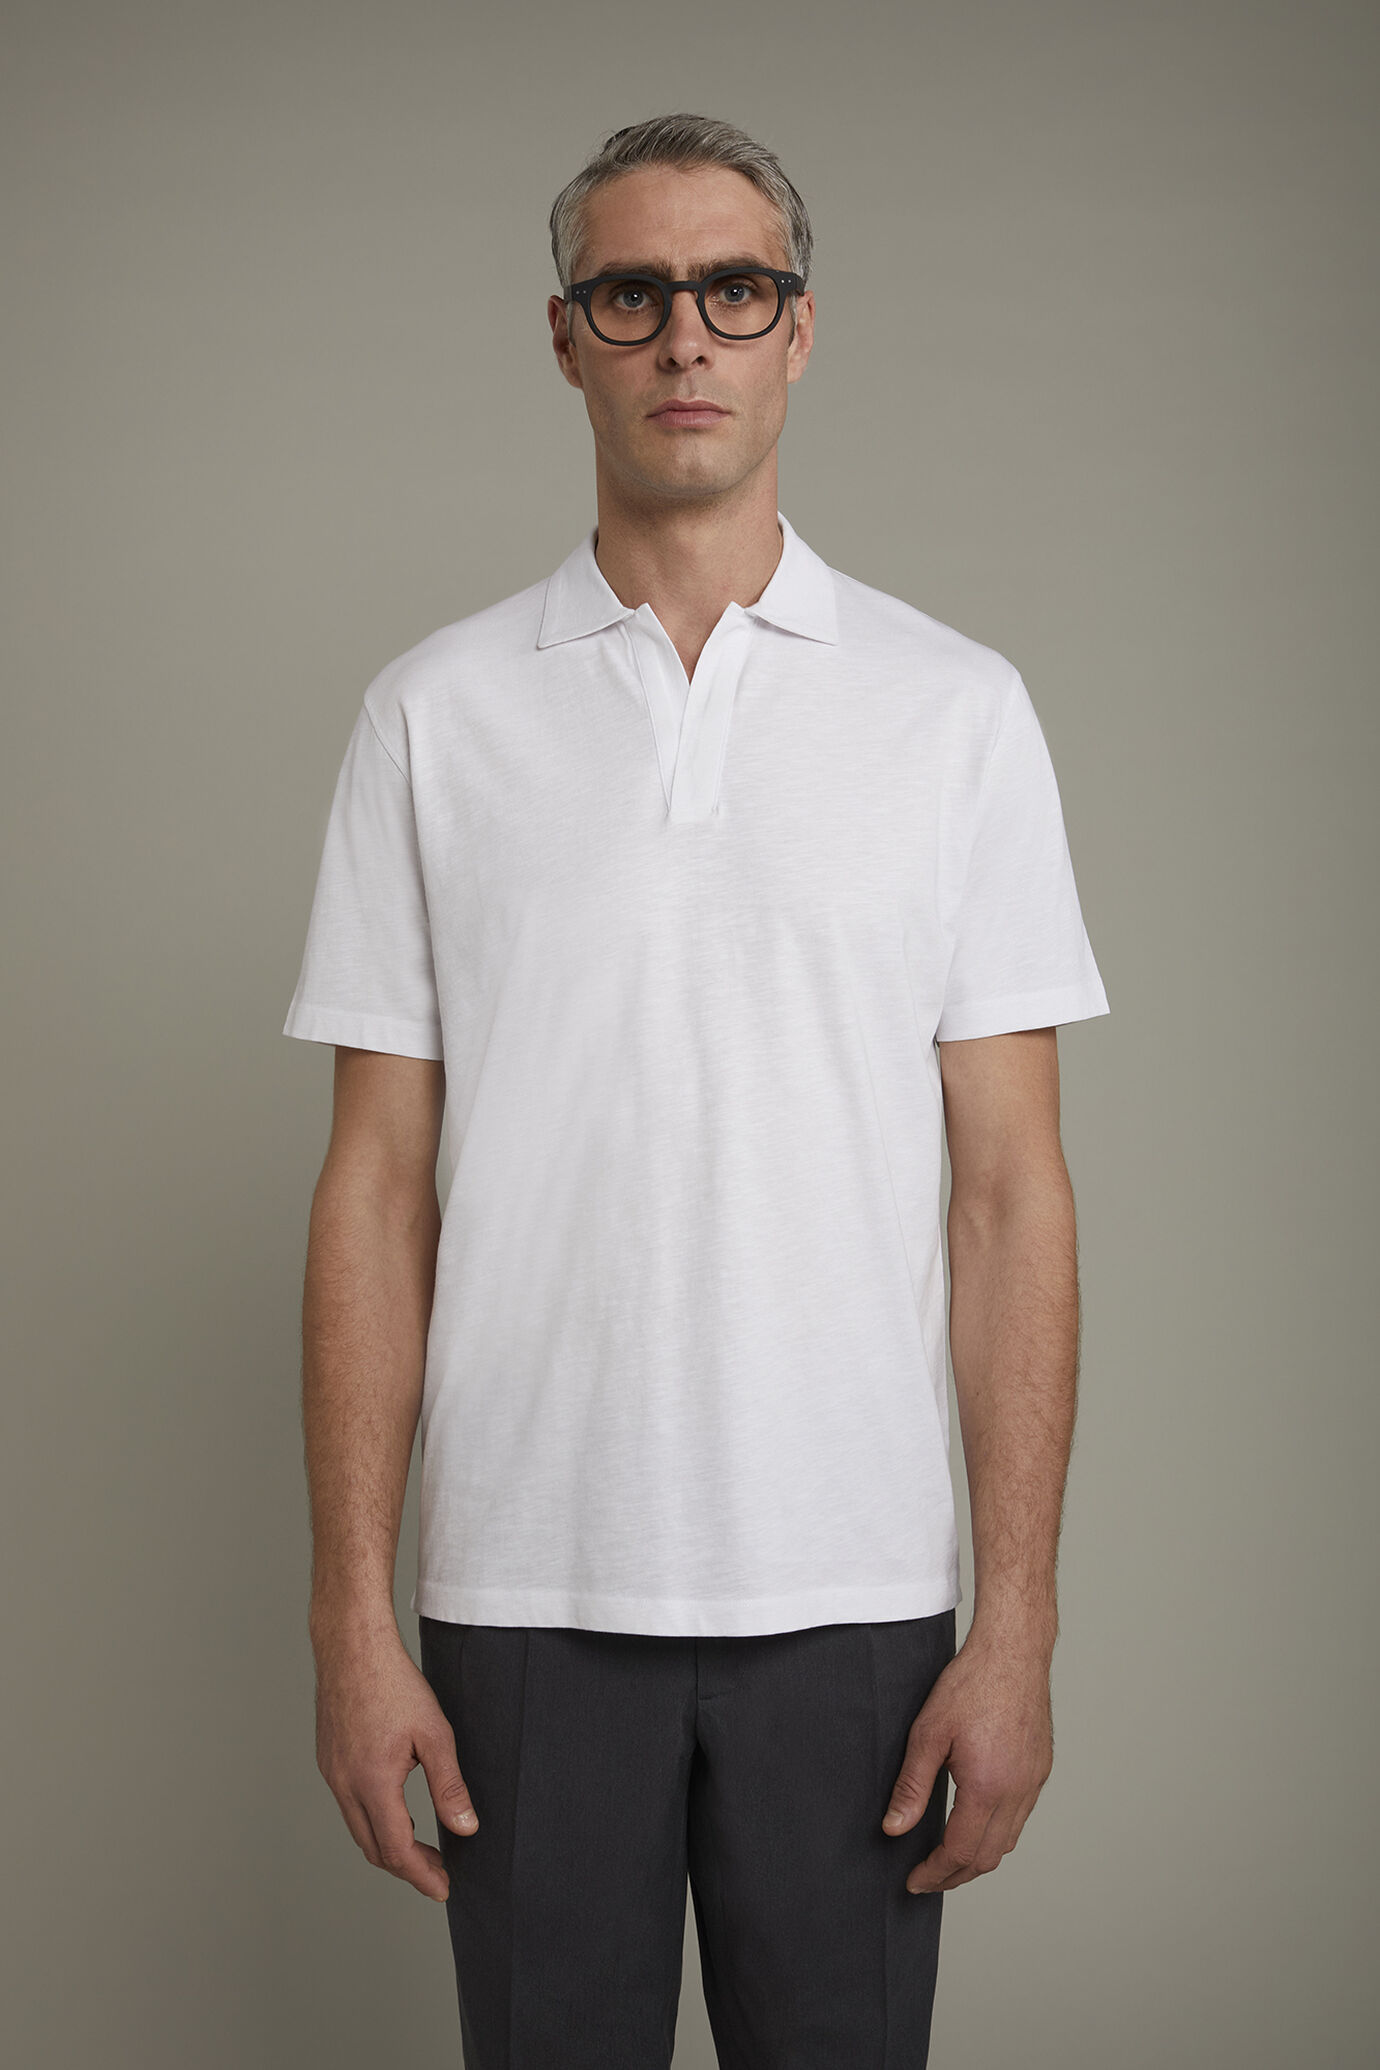 Men’s short sleeve button-less polo shirt with derby collar in pure cotton regular fit